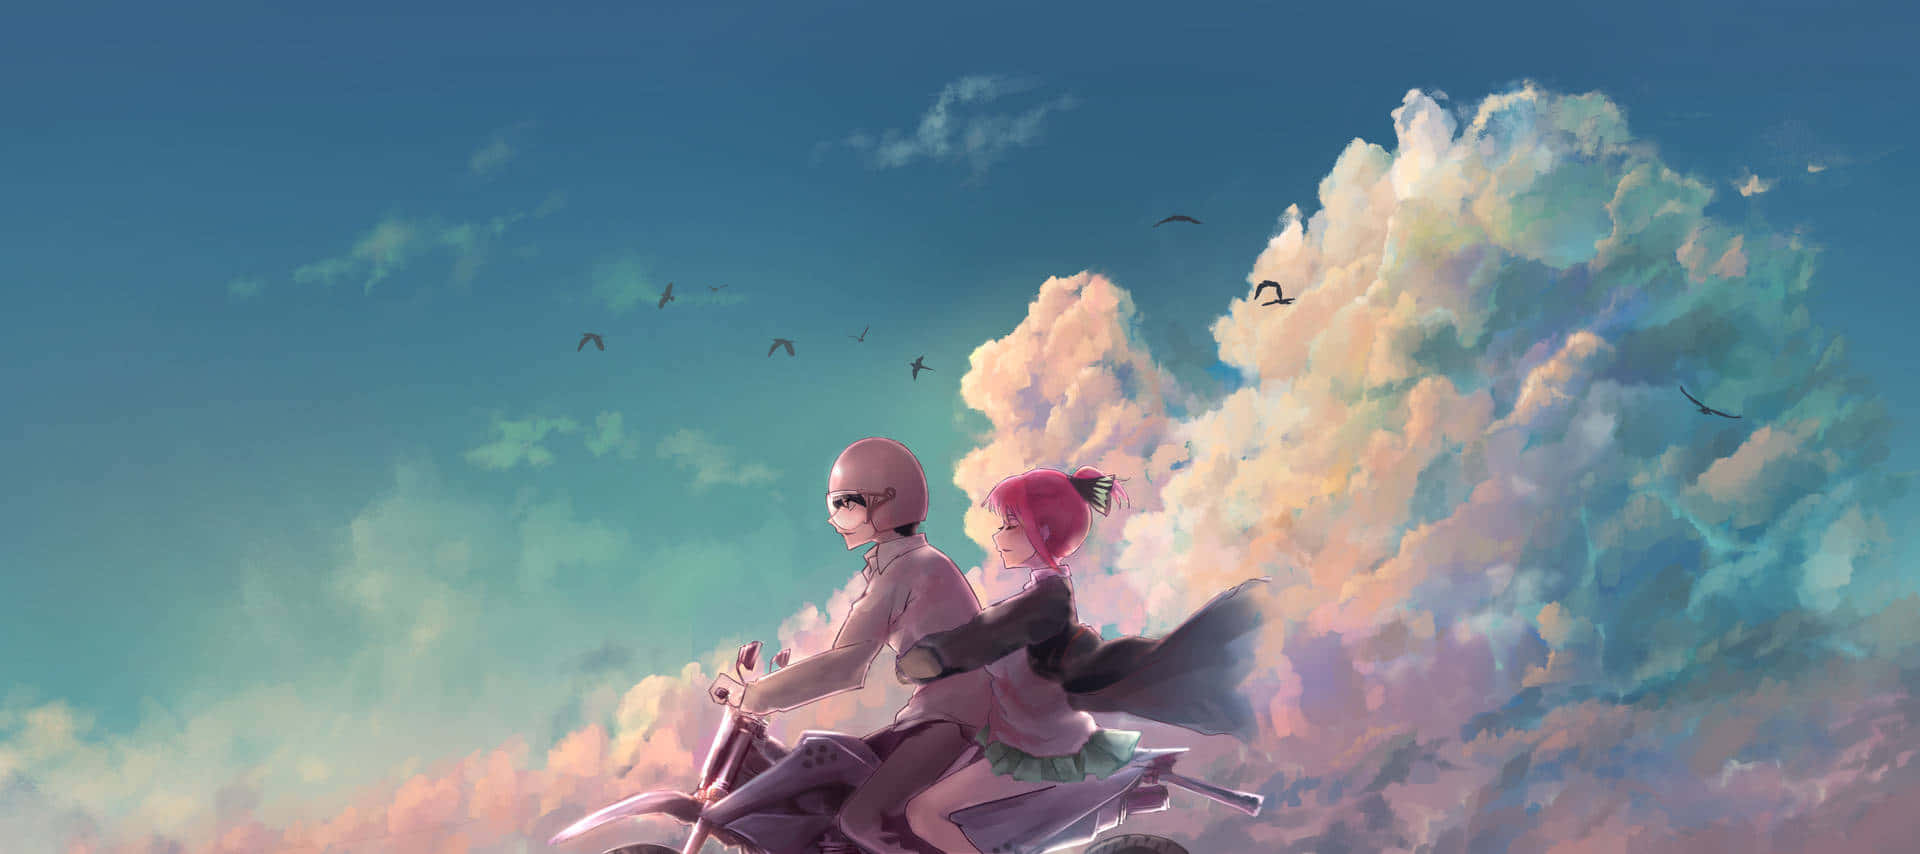 Wholesome Couple Enjoying A Motorcycle Ride Background